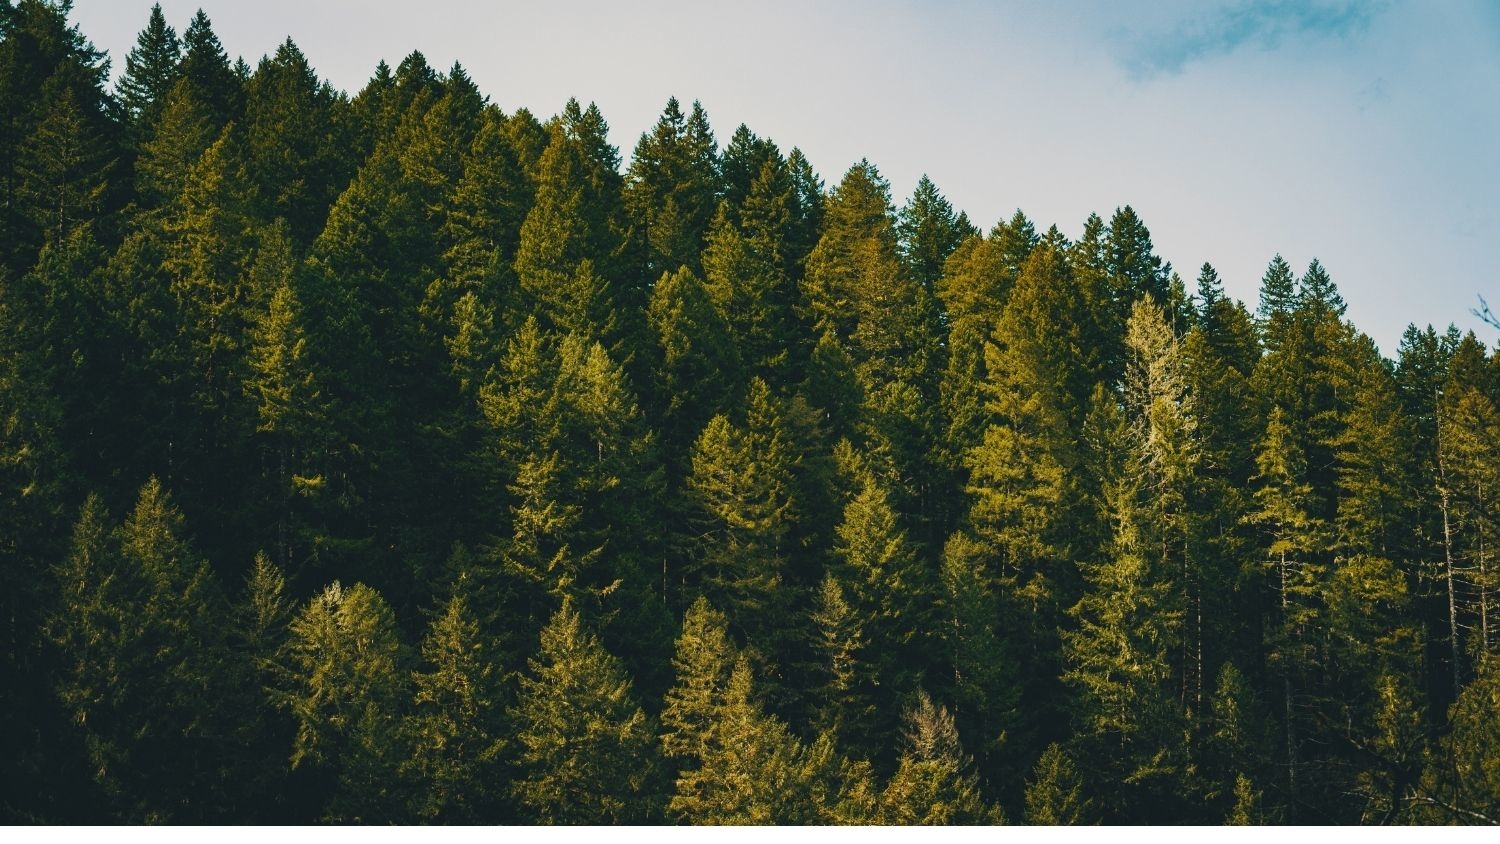 Mountain forest - Saving America's Forests Could Help Curb Climate Warming - College of Natural Resources News NC State University